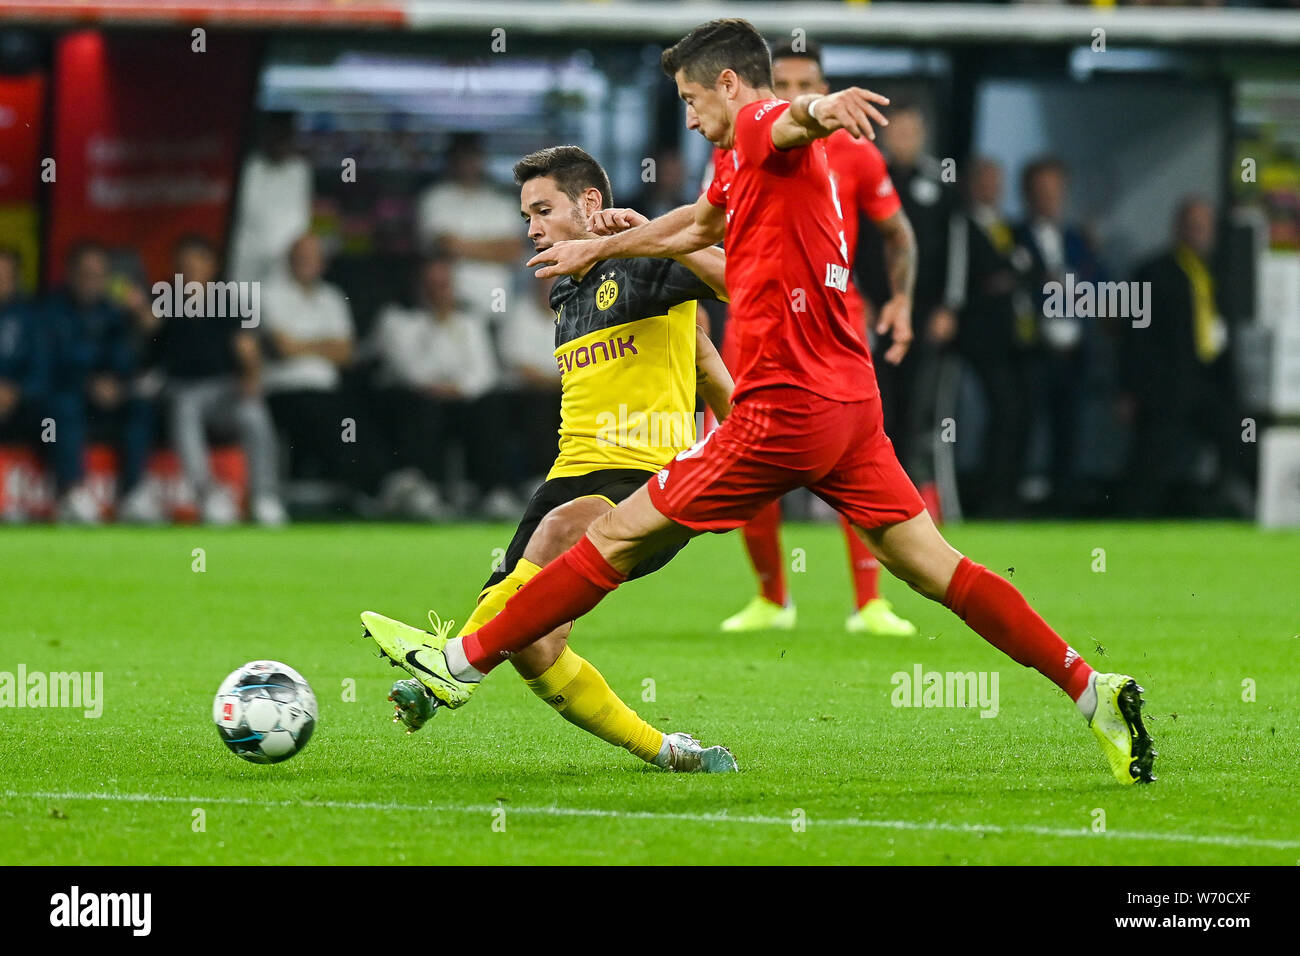 Raphael Guerreiro from Borussia Dortmund (L) and Robert Lewandowski from Bayern Munich (R) are seen in action during the Germany Supercup Final 2019 match between Borussia Dortmund and Bayern Munich.(Final score: Borussia Dortmund 2:0 Bayern Munich) Stock Photo